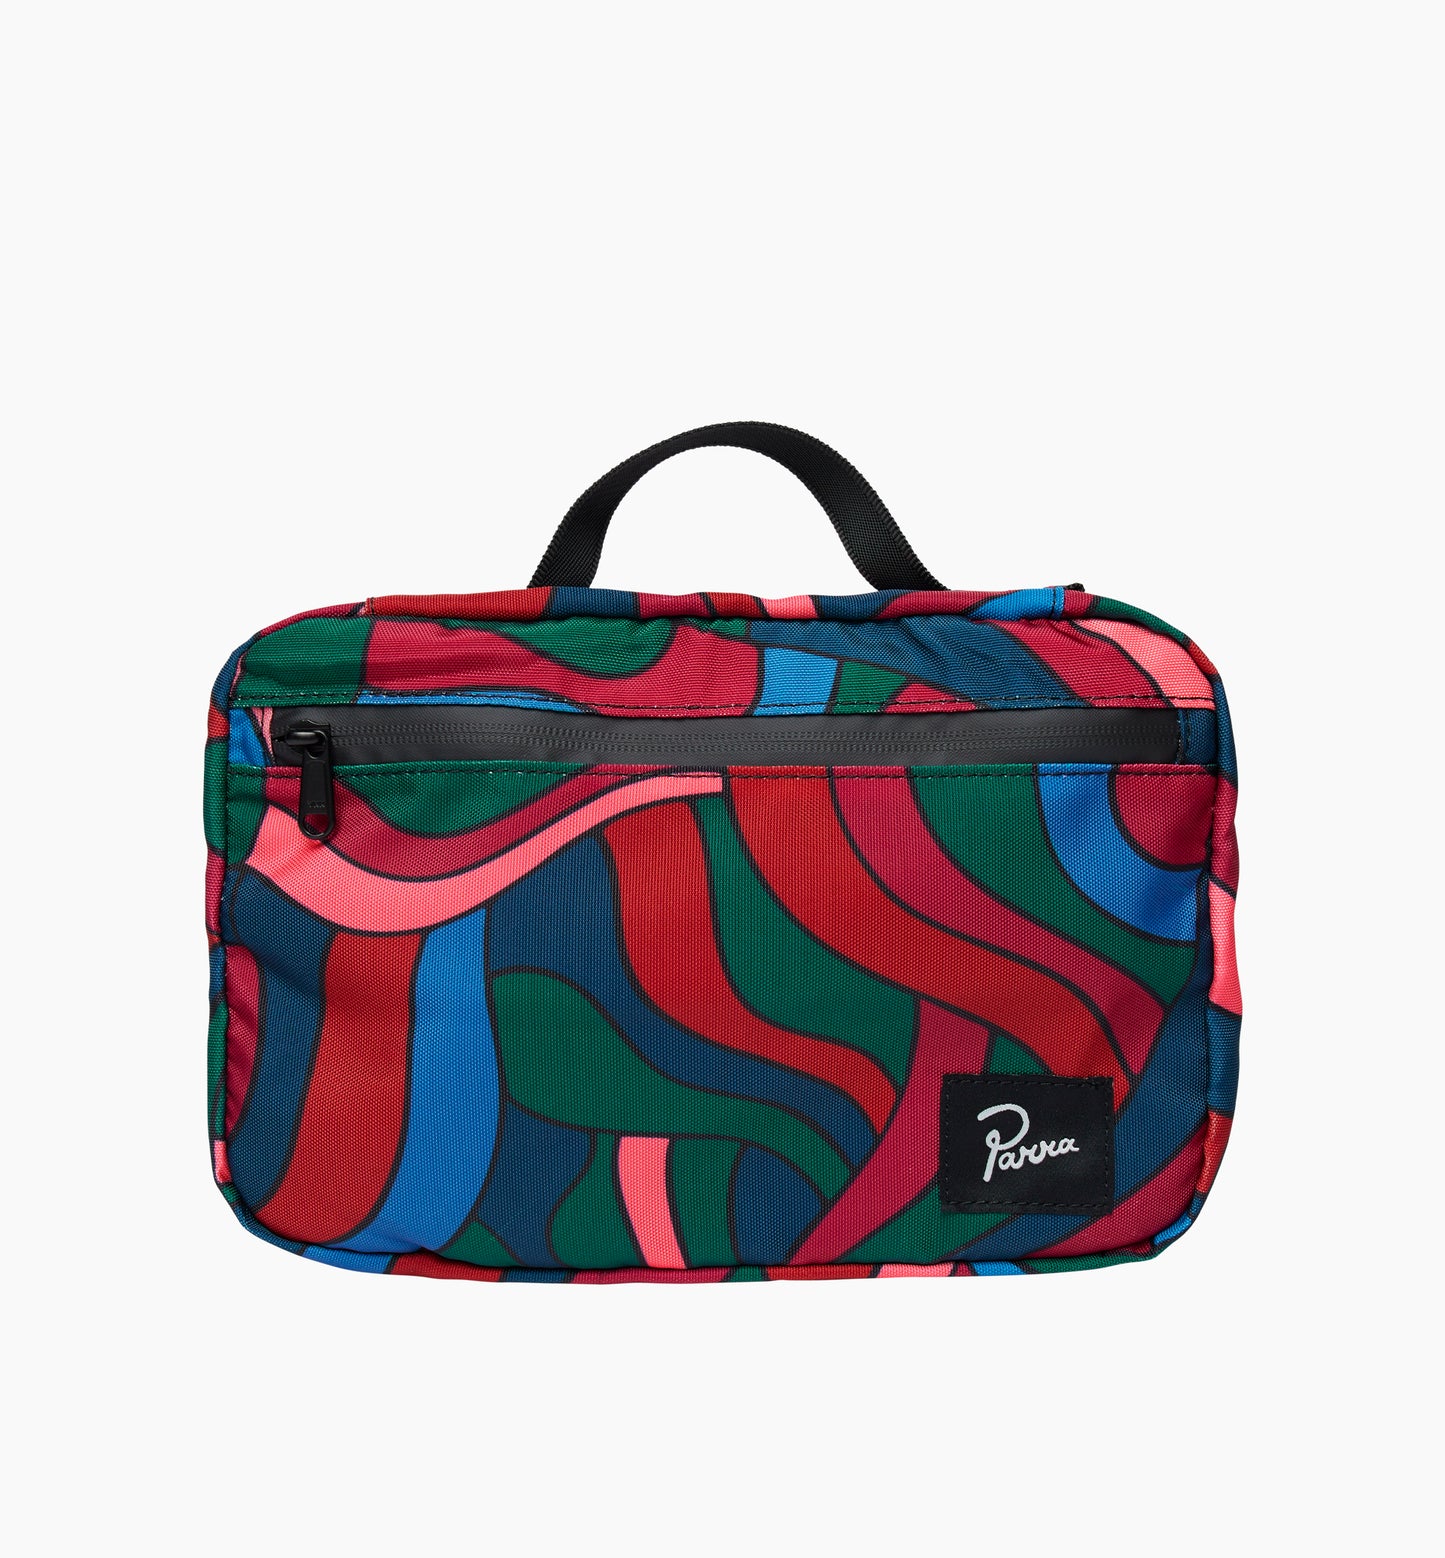 By Parra Distorted Waves Toiletry Bag